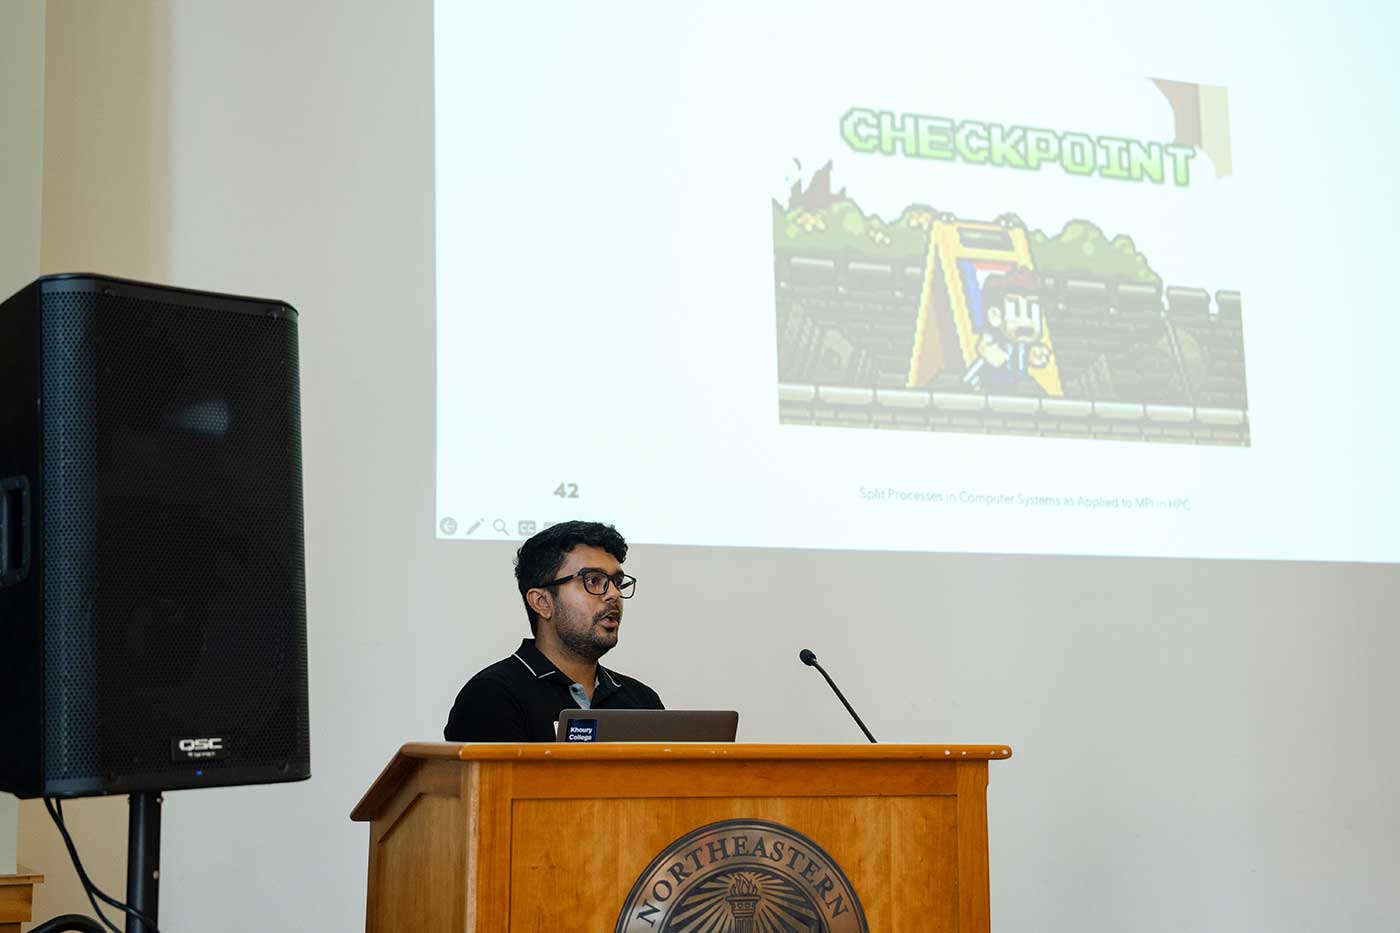 Kush Pandya presents a project while standing behind a podium, with the projection screen visible in the background